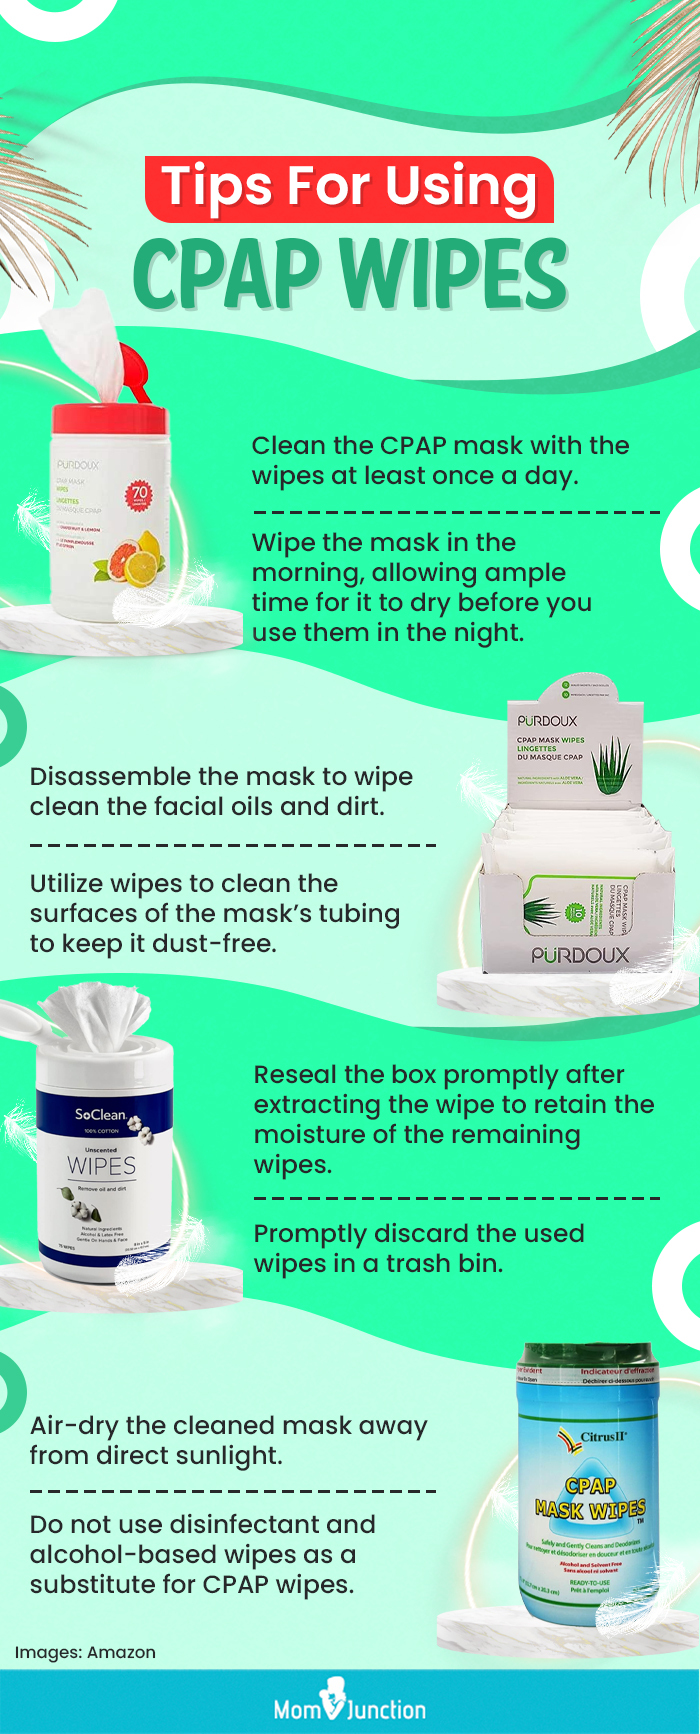 Tips For Using CPAP Wipes (infographic)